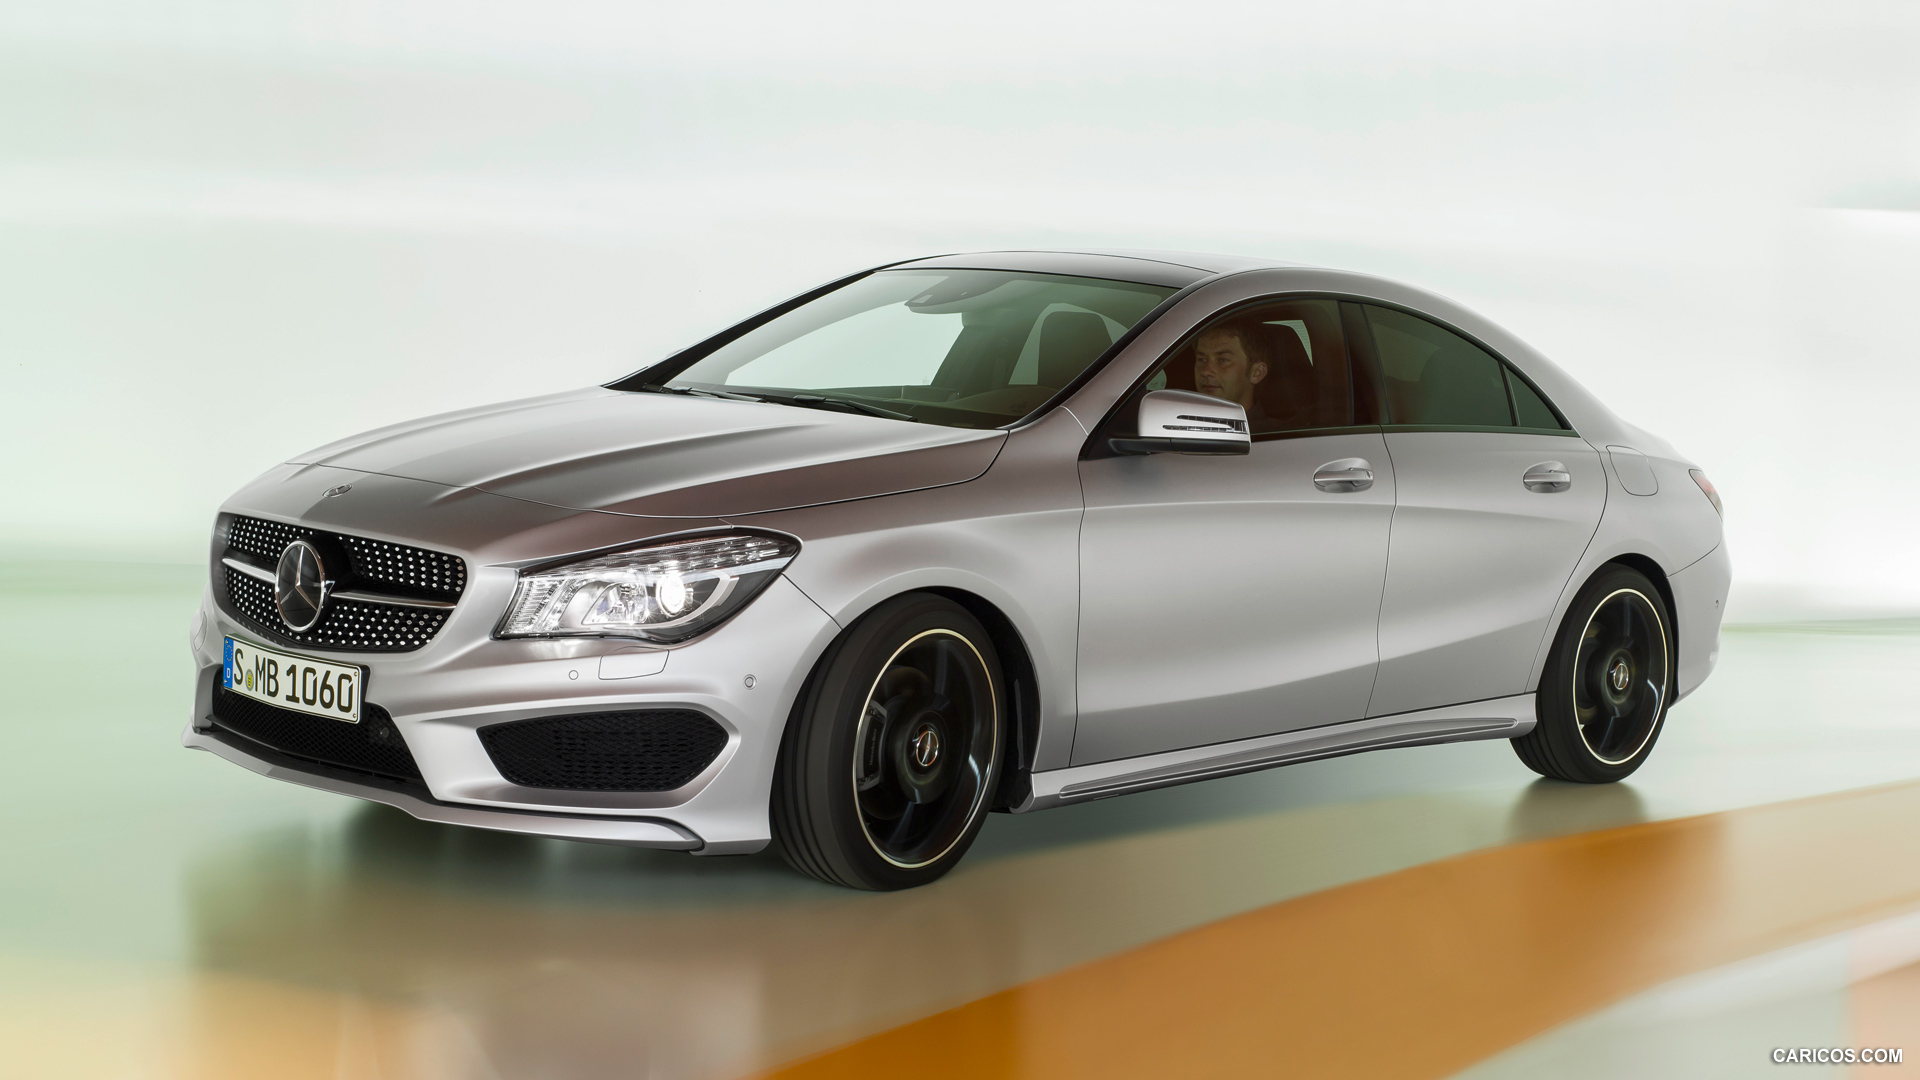 2014 Mercedes-Benz CLA-Class CLA 250 Edition 1 - Front, #51 of 183